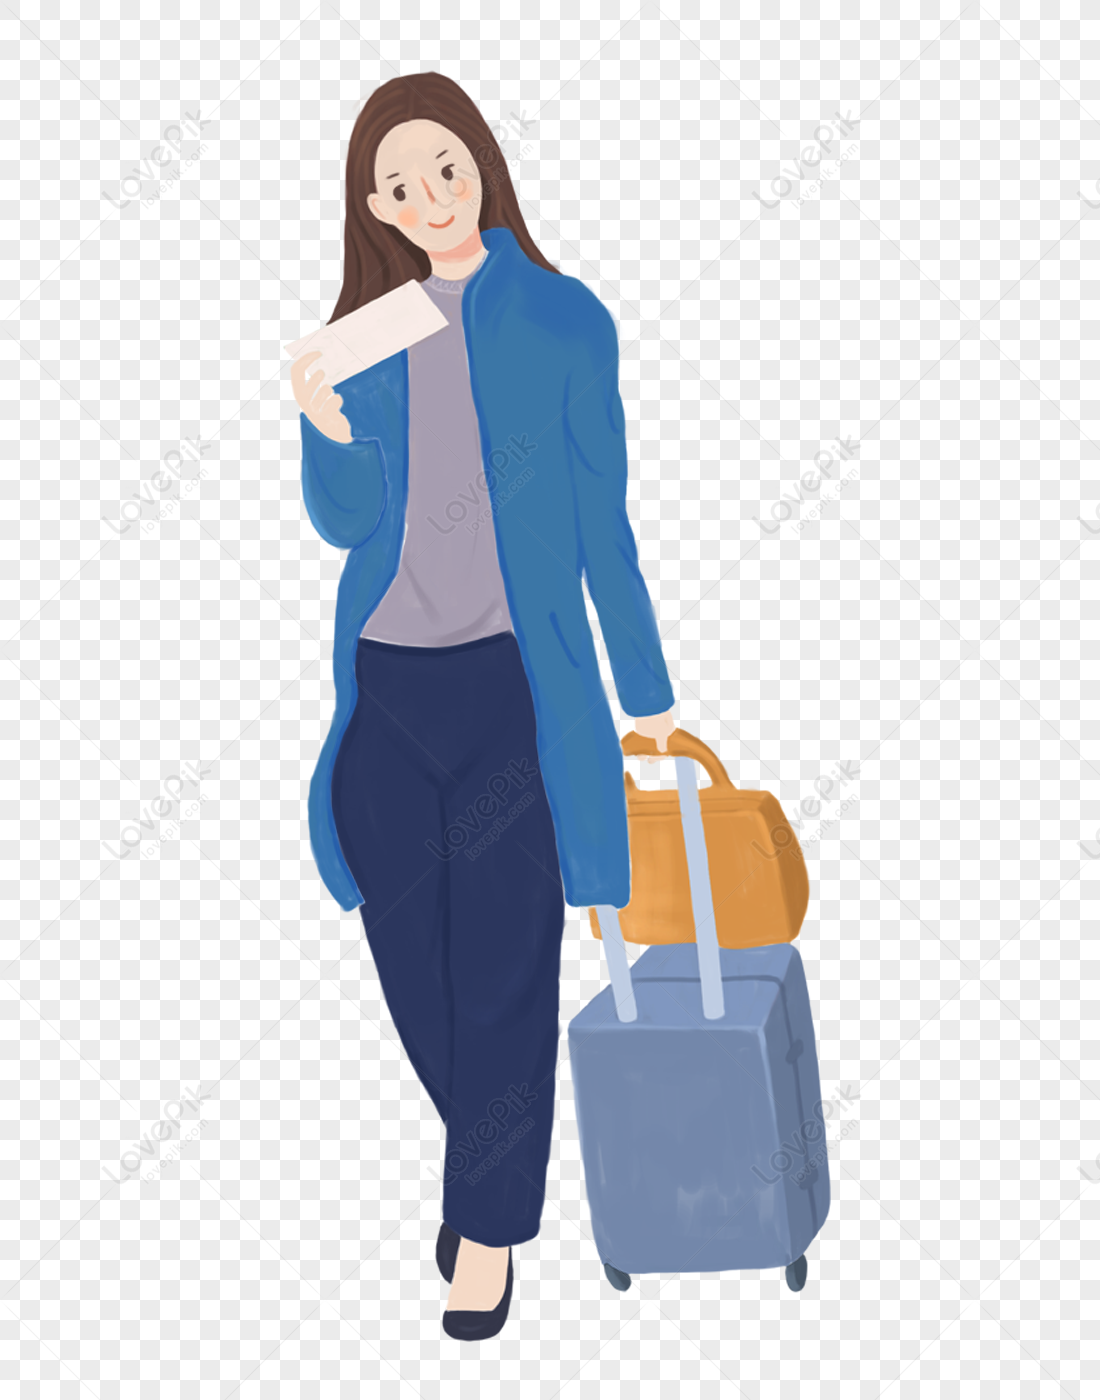 A girl traveling, blue suitcase, animated cartoon, cartoon female png transparent background